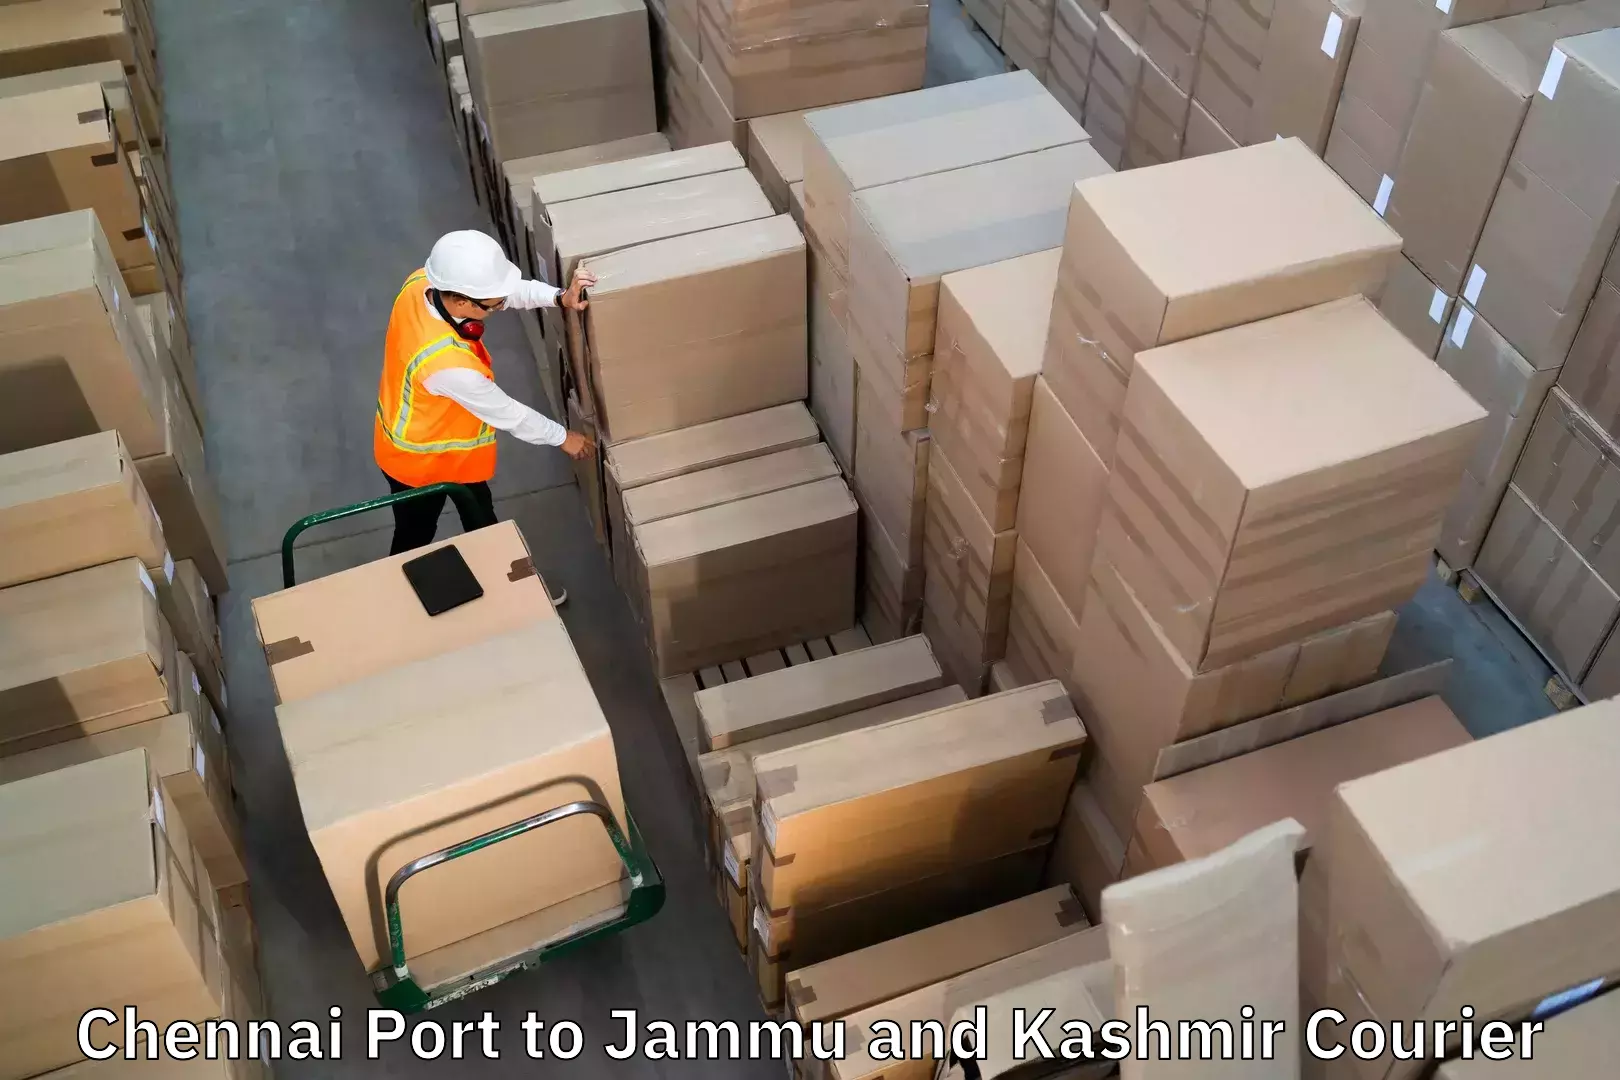 Baggage relocation service in Chennai Port to Jammu